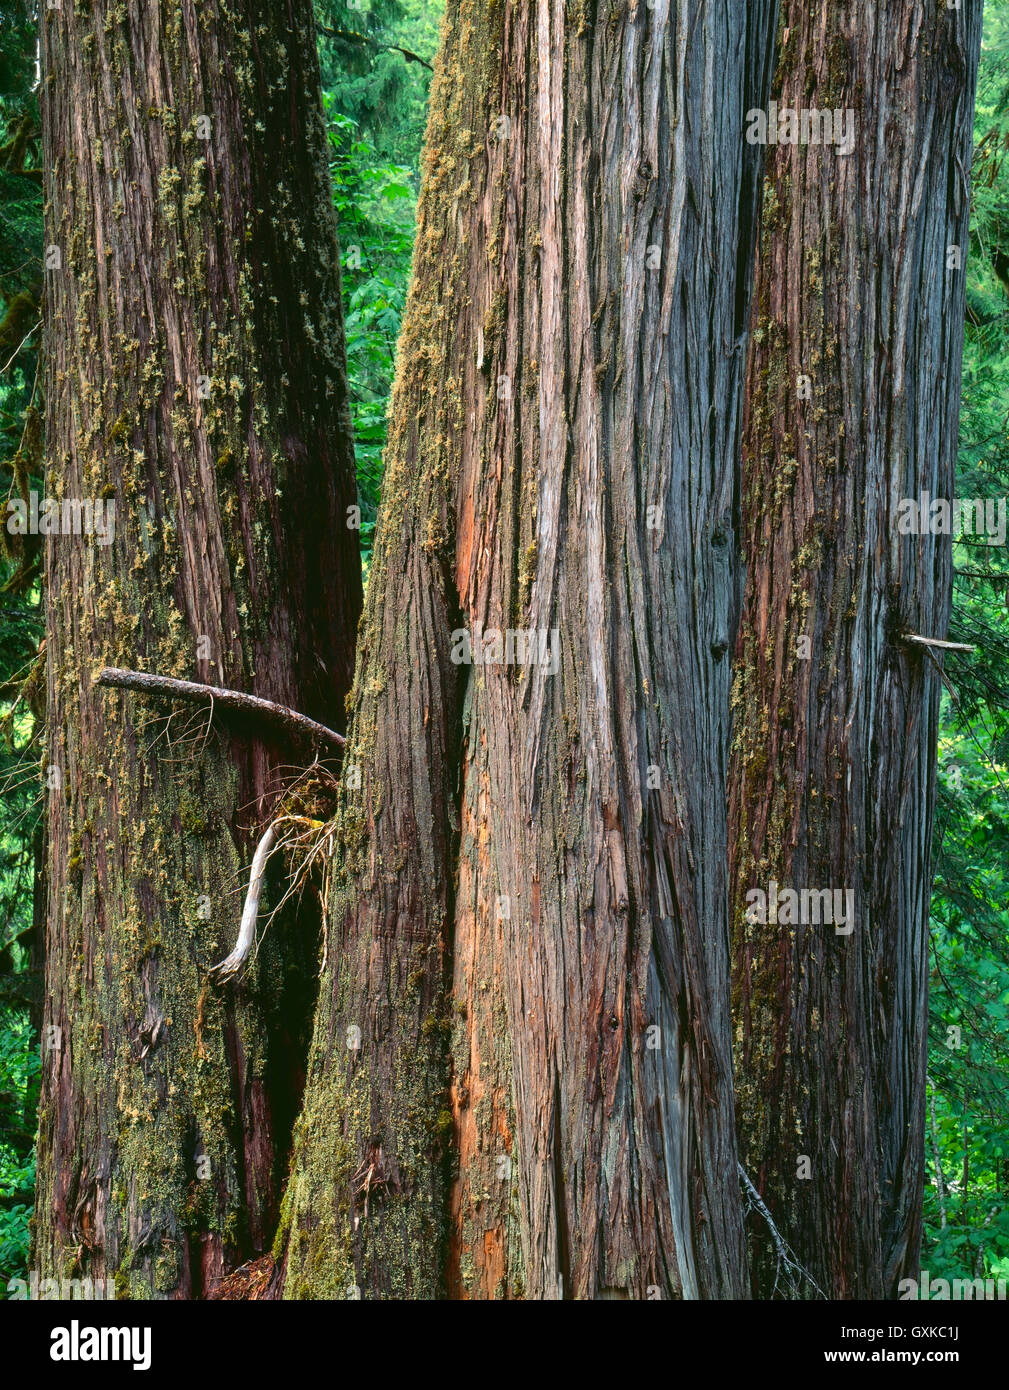 USA, Oregon, Willamette National Forest, Middle Santiam Wilderness, Trio of ancient western red cedars in old growth forest. Stock Photo